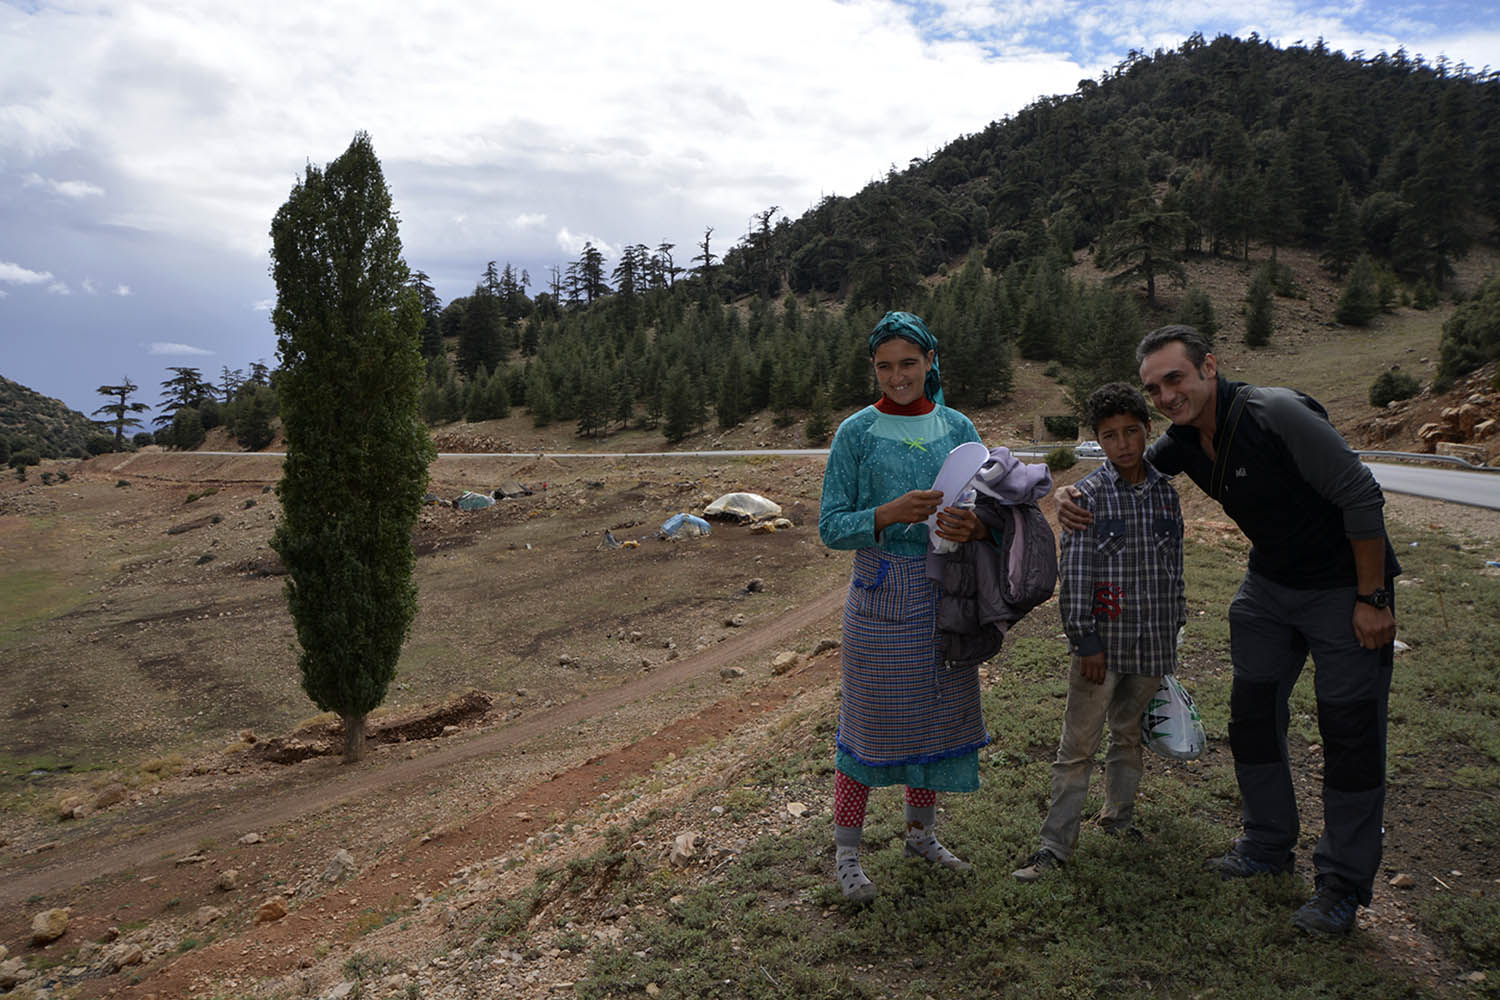 "Cheikha family with a Spanish visitor, and the family's woven wool tents in the background."